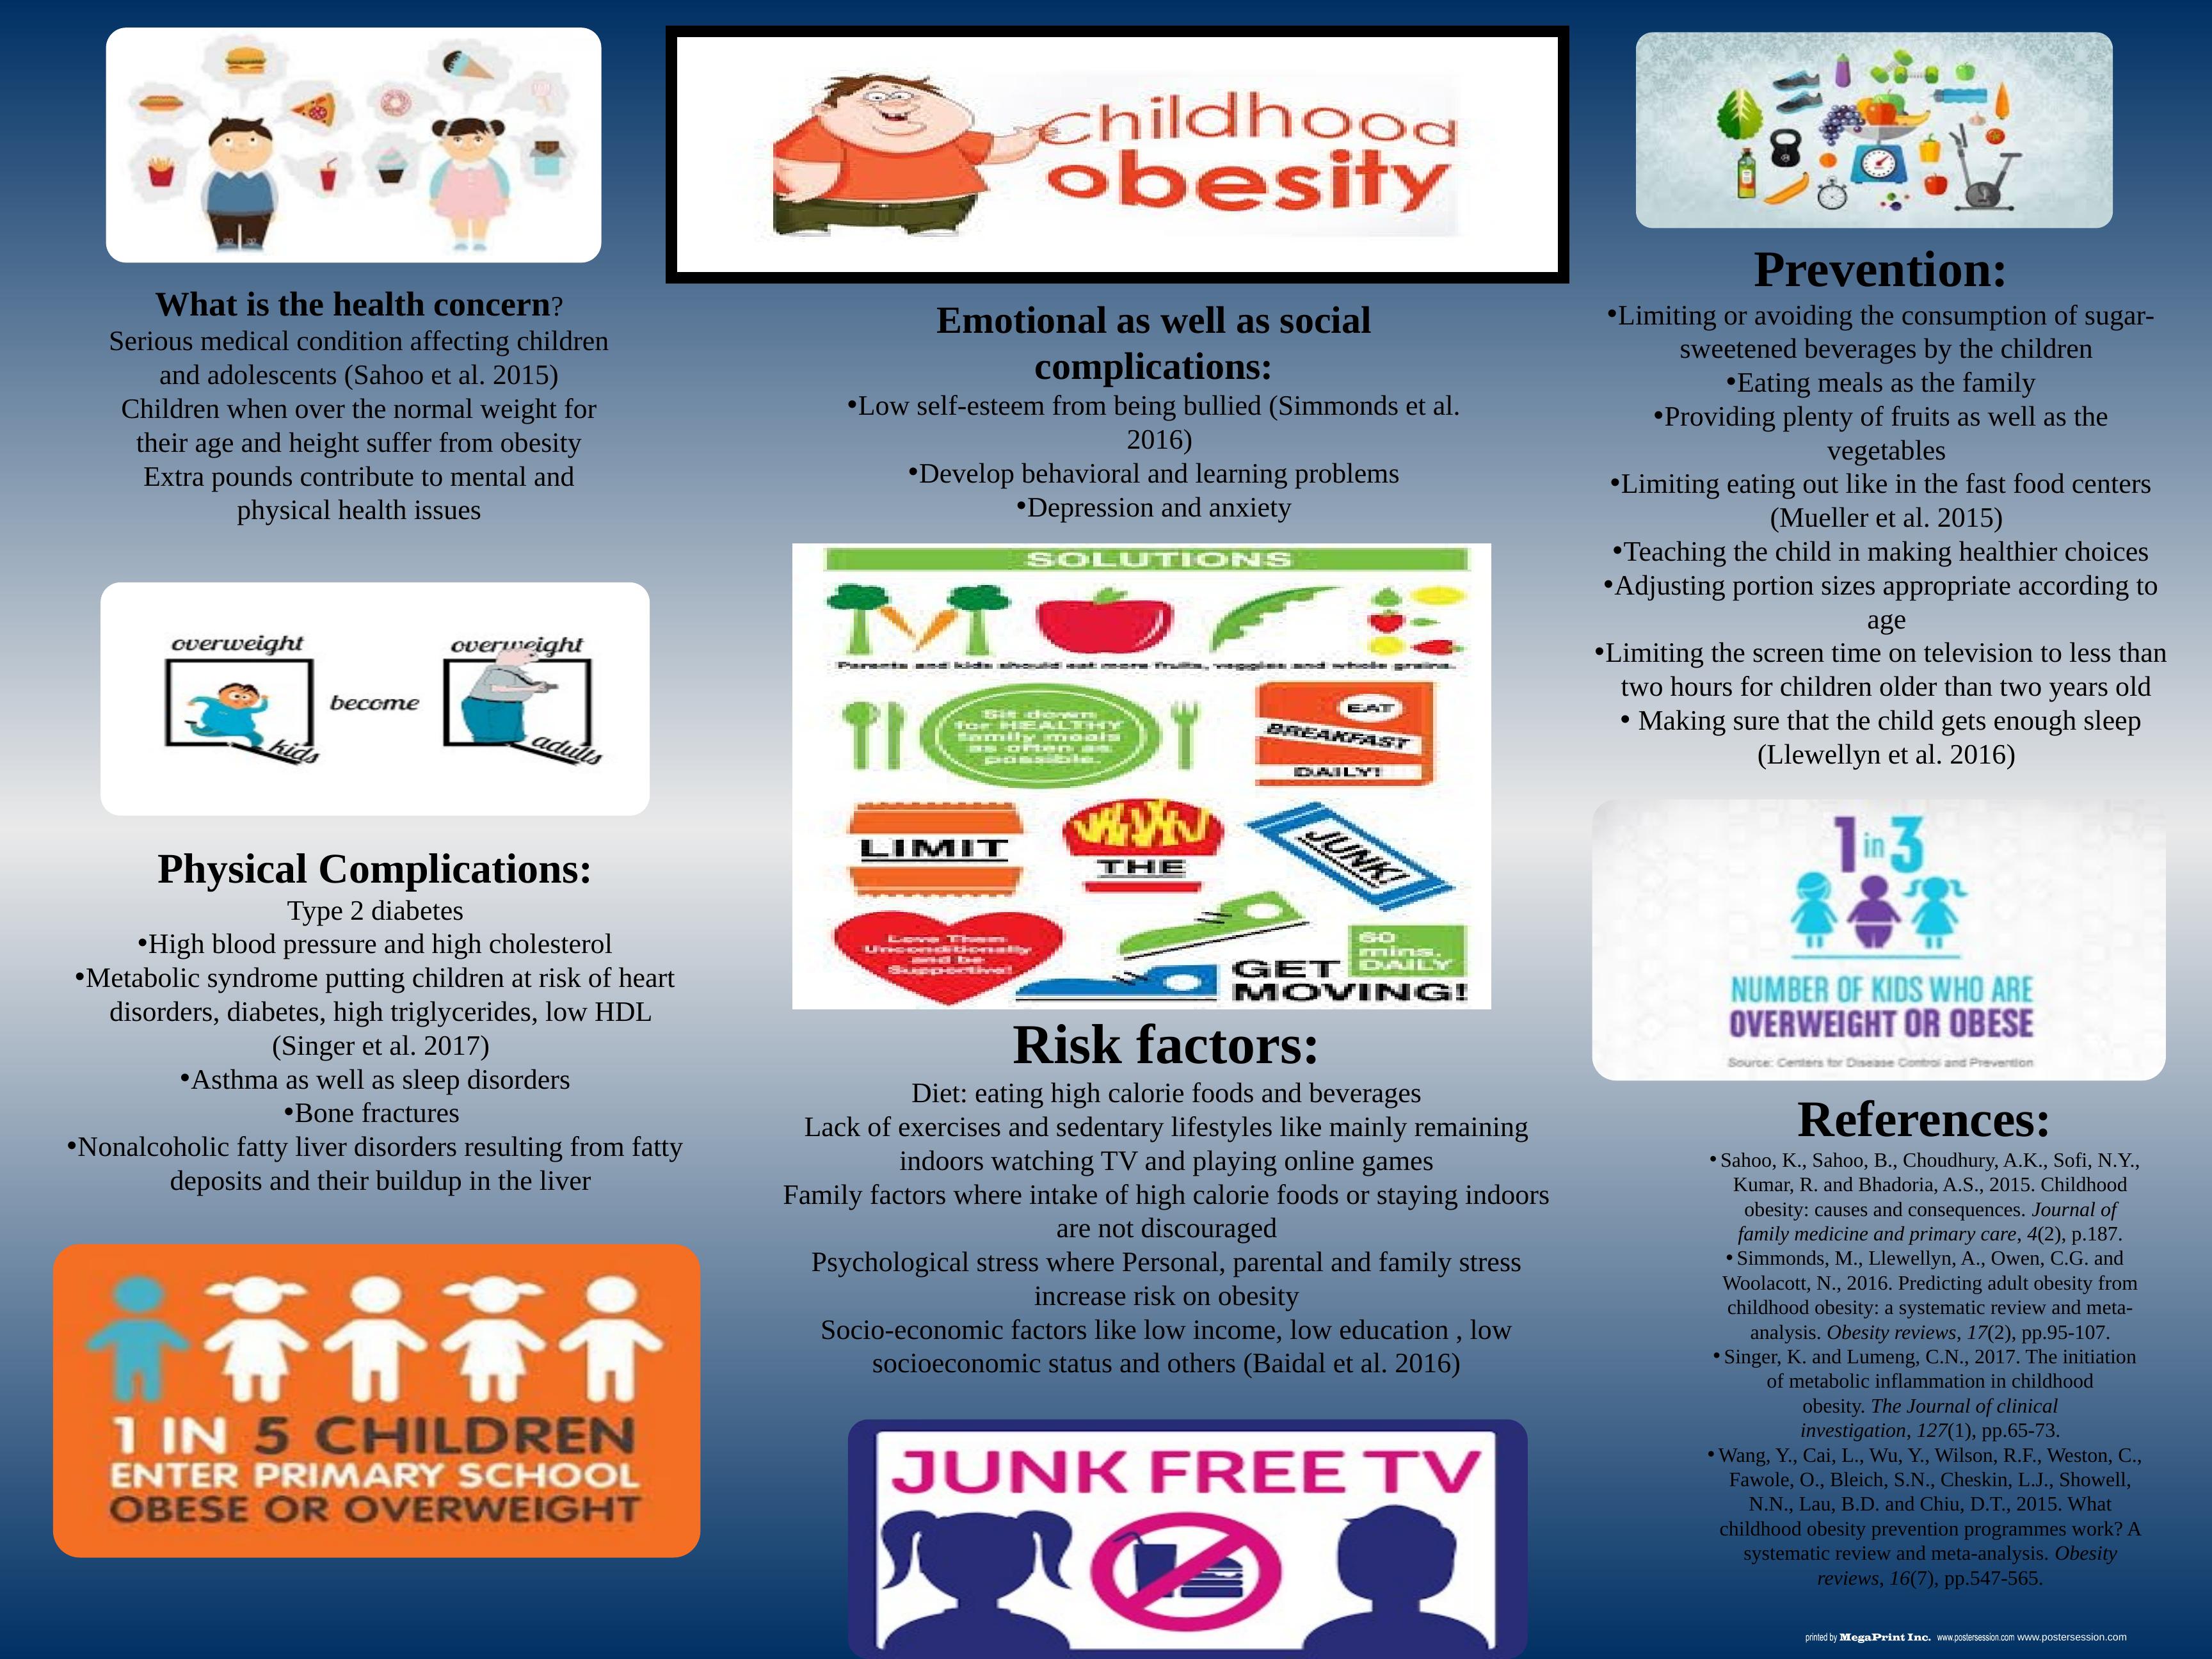 Childhood Obesity: Health Concern, Prevention, and Complications_1